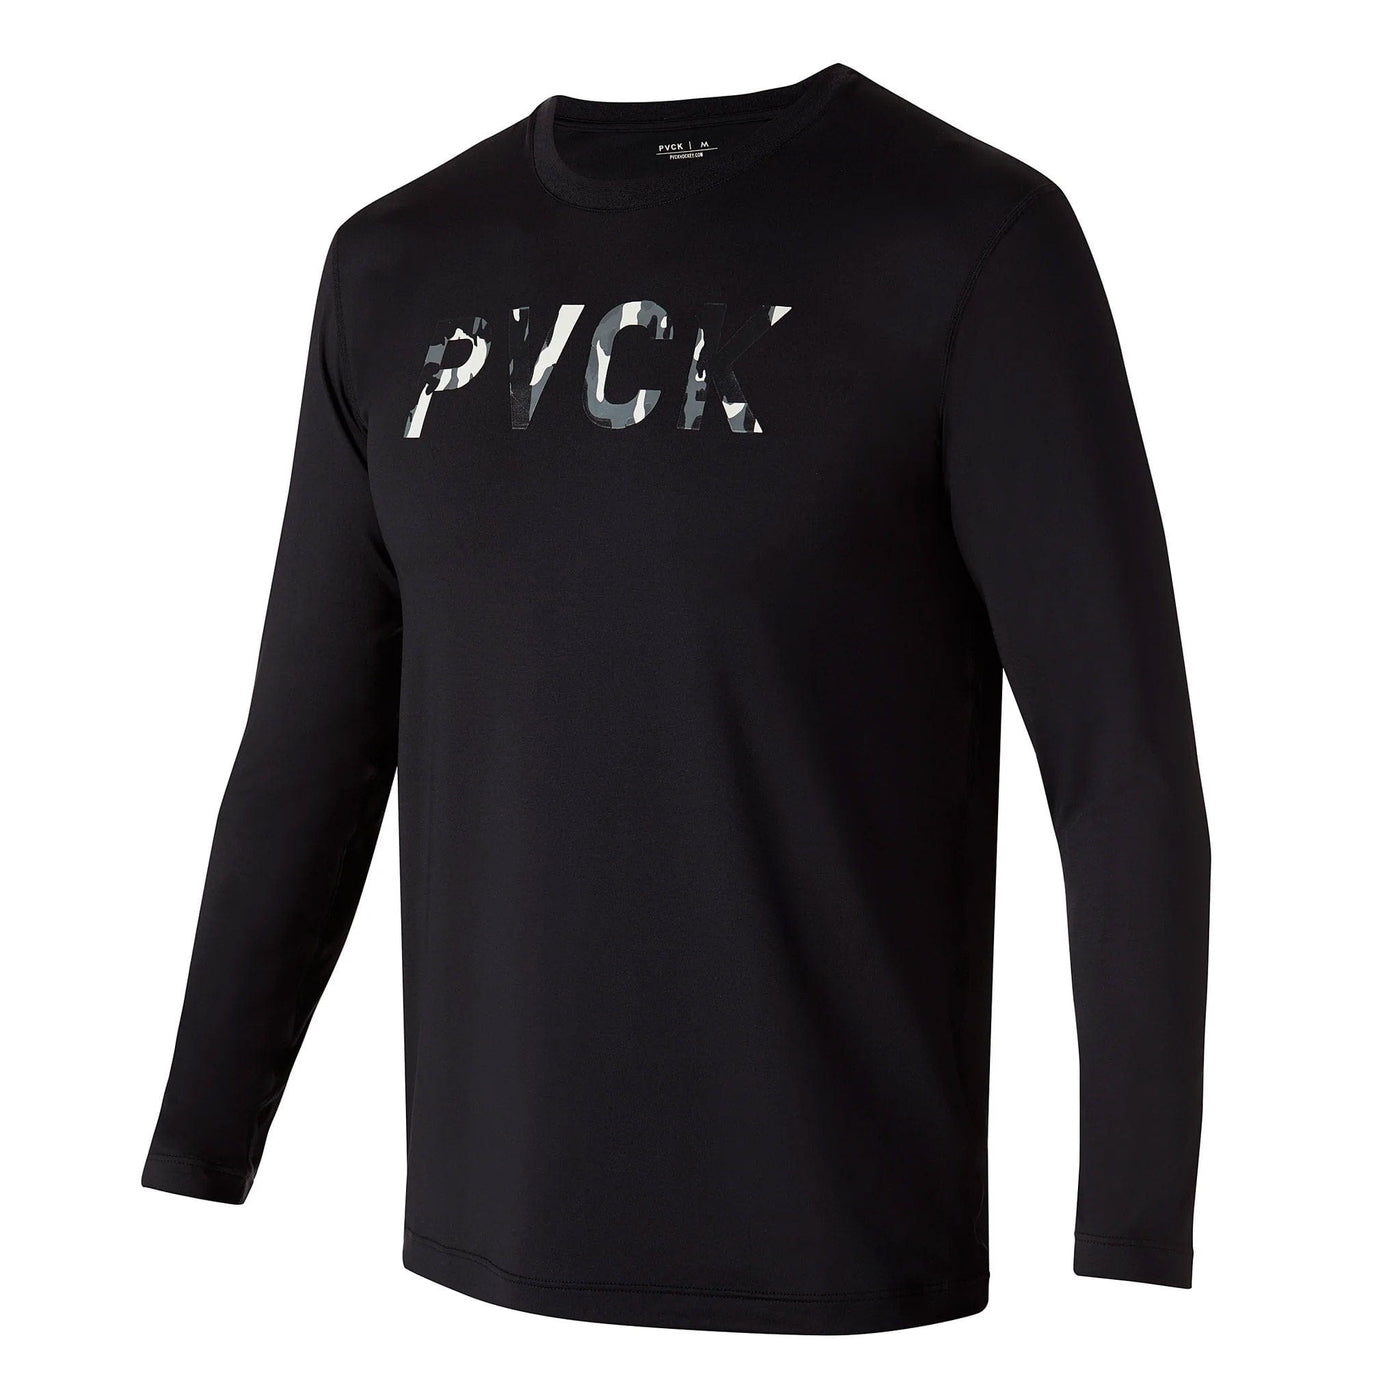 PVCK Performance Youth Baselayer Shirt - Camo - The Hockey Shop Source For Sports